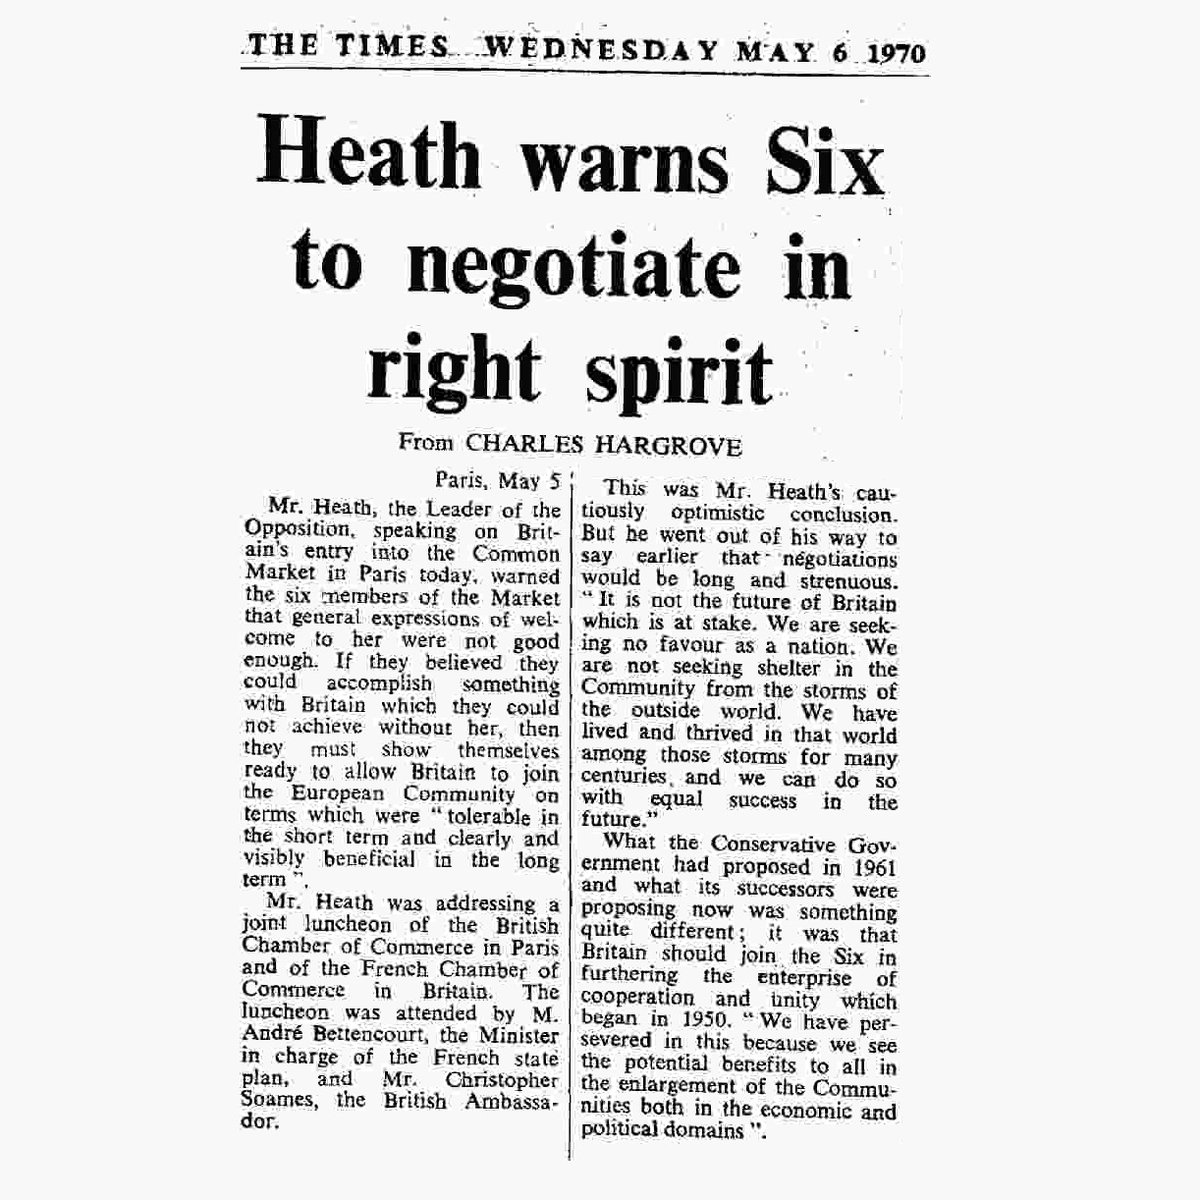 So let’s look at how the Heath government. Starting with the General Election:May 6th, 1970: Heath “We have persevered in this because we see the potential benefits to all in the enlargement of the Communities both in the economic and political domains”.